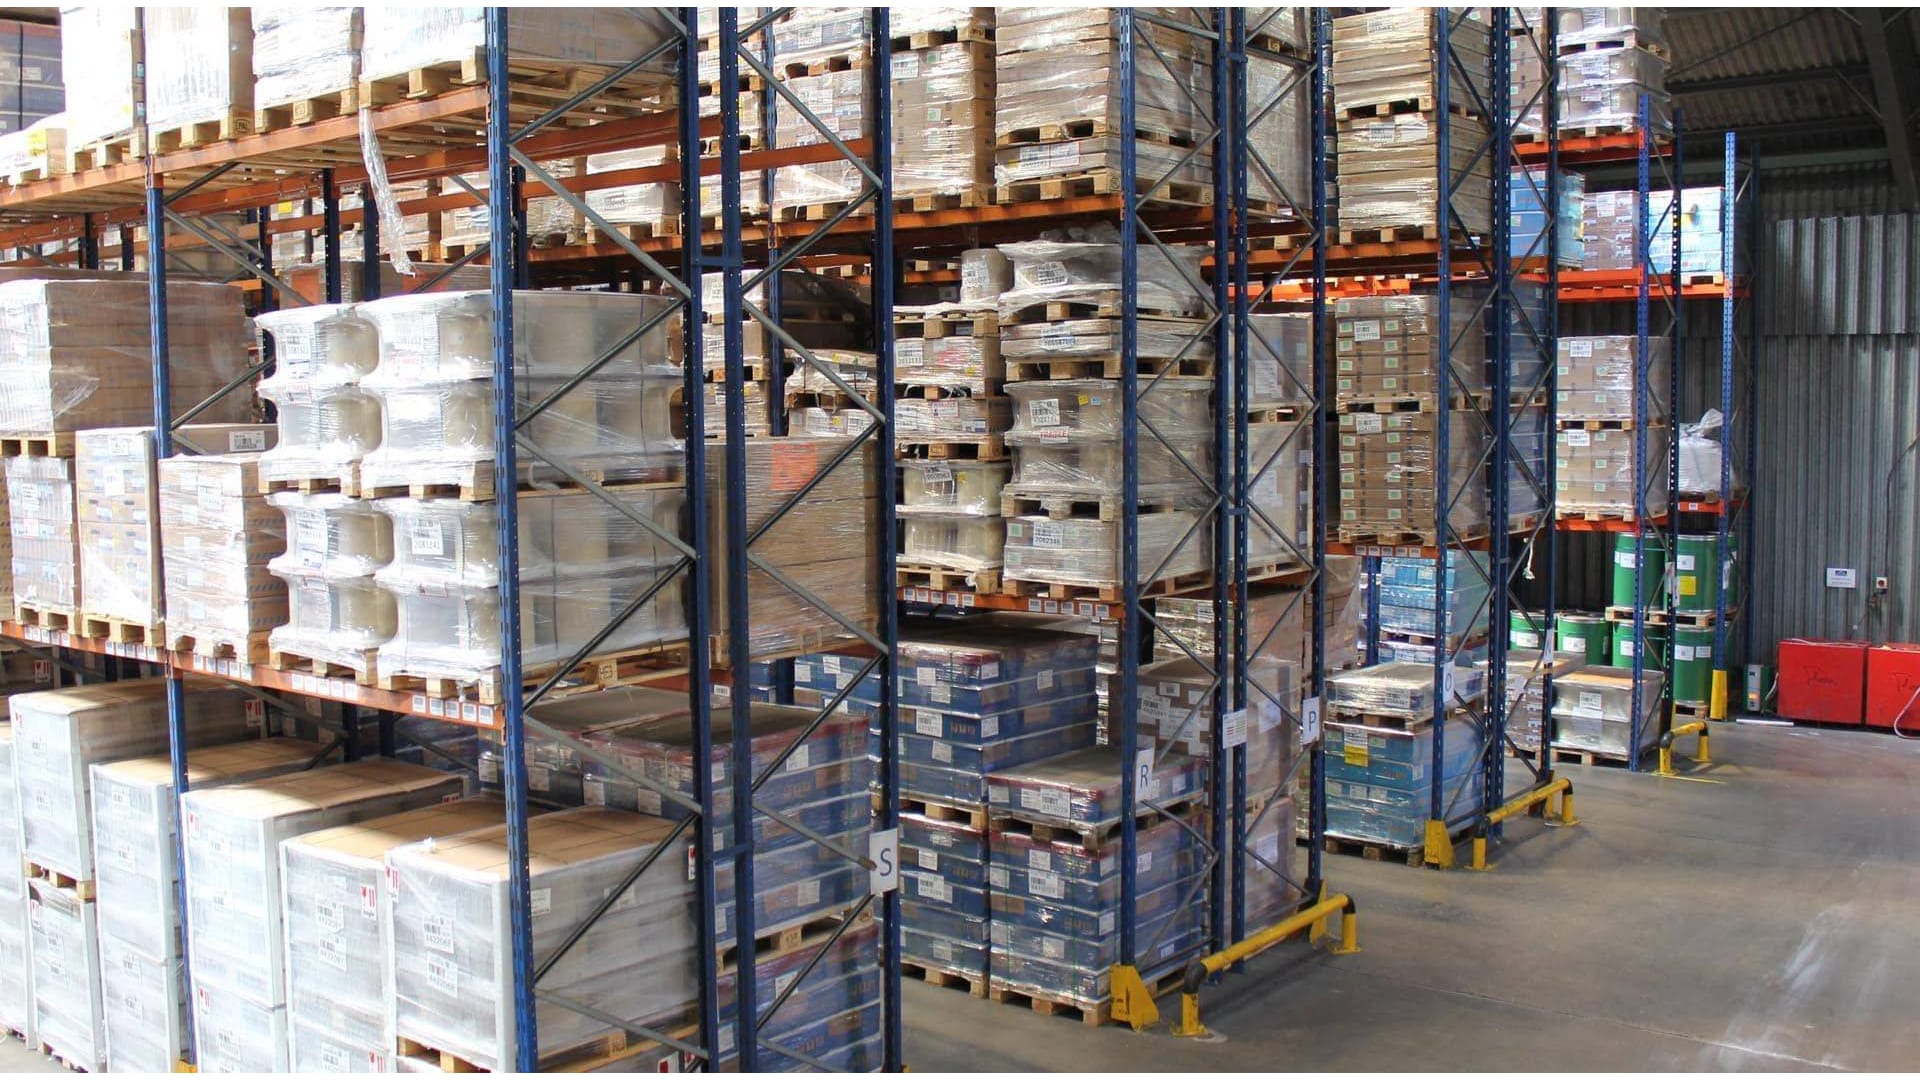 Image of warehouse shelves with neatly stacked boxes and cartons.